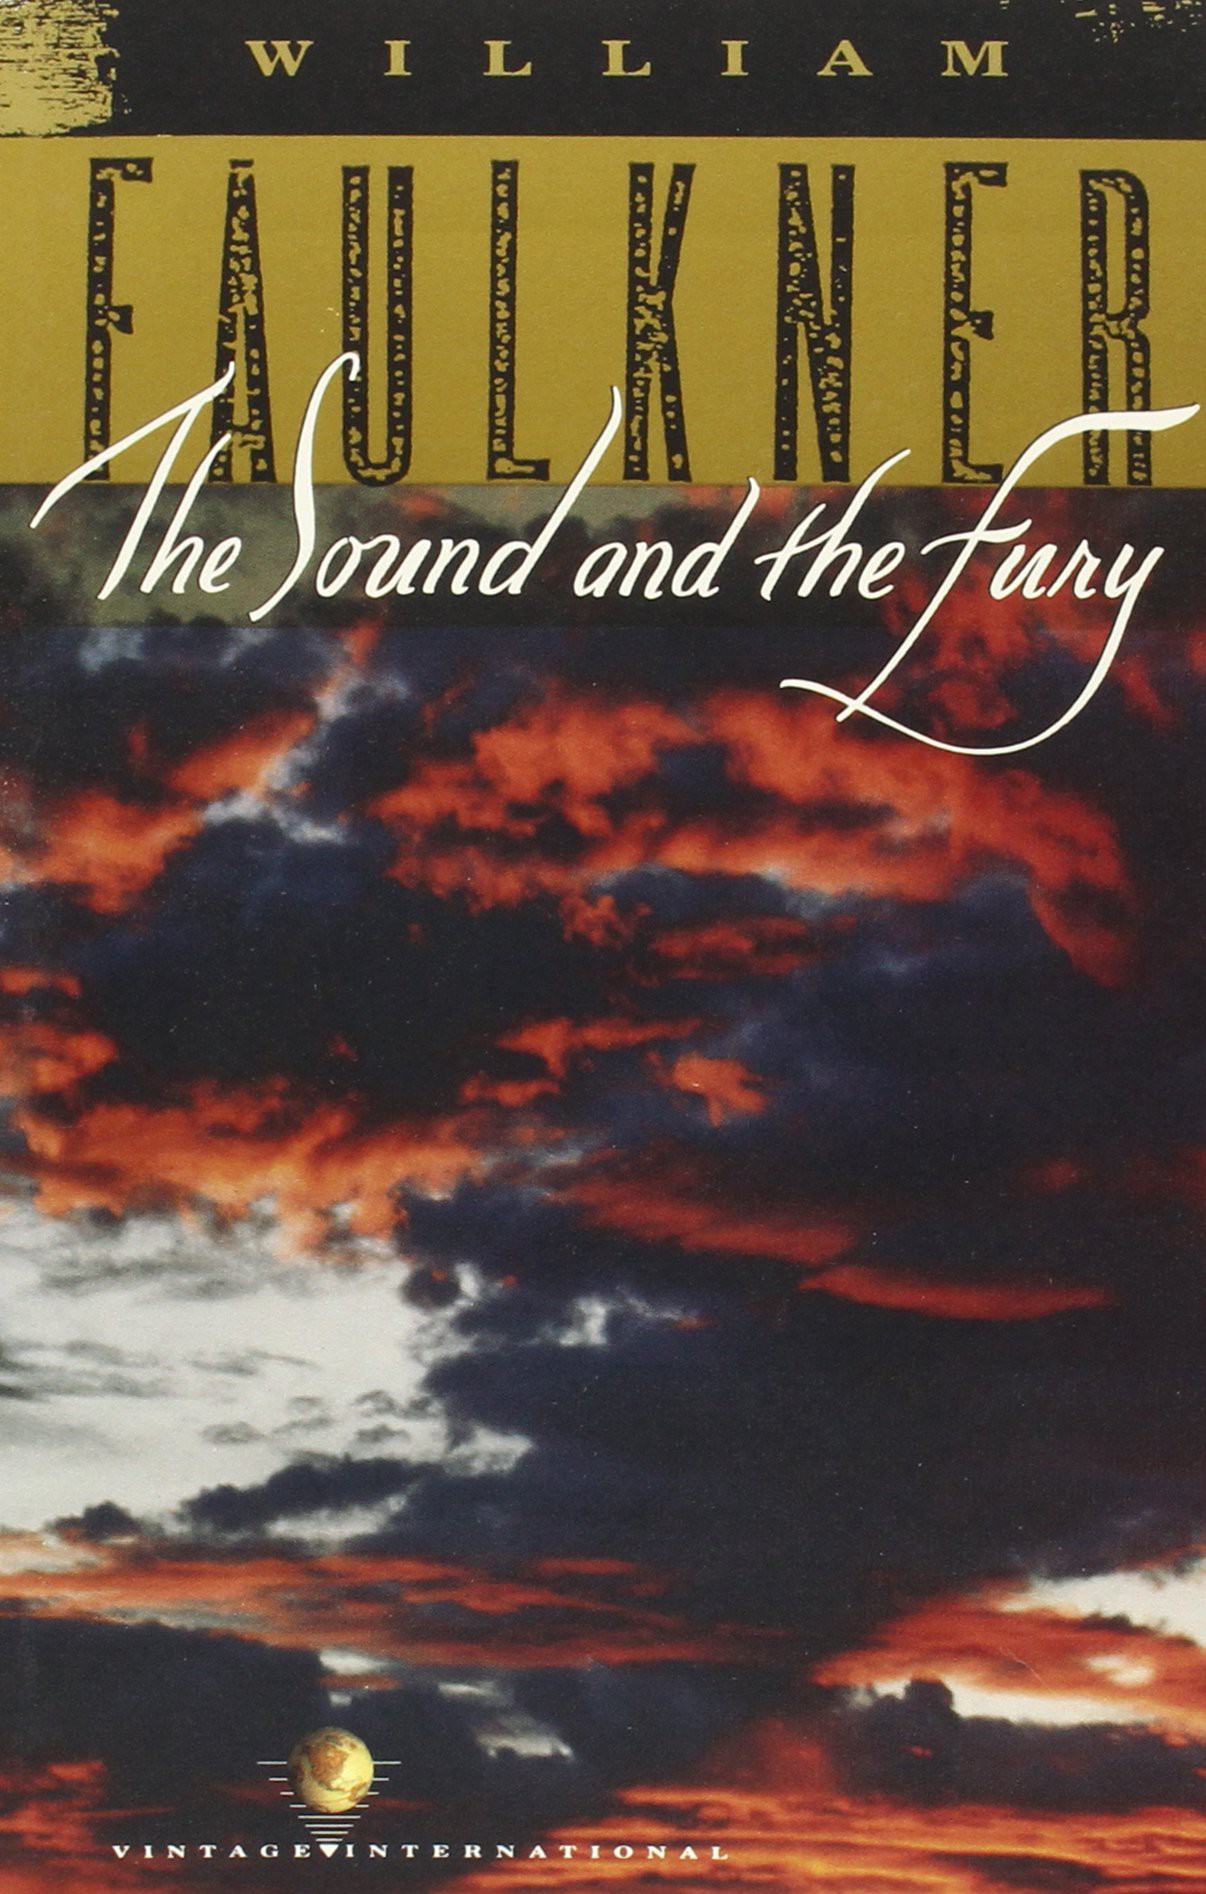 The cover of William Faulkner's book "The Sound and the Fury."